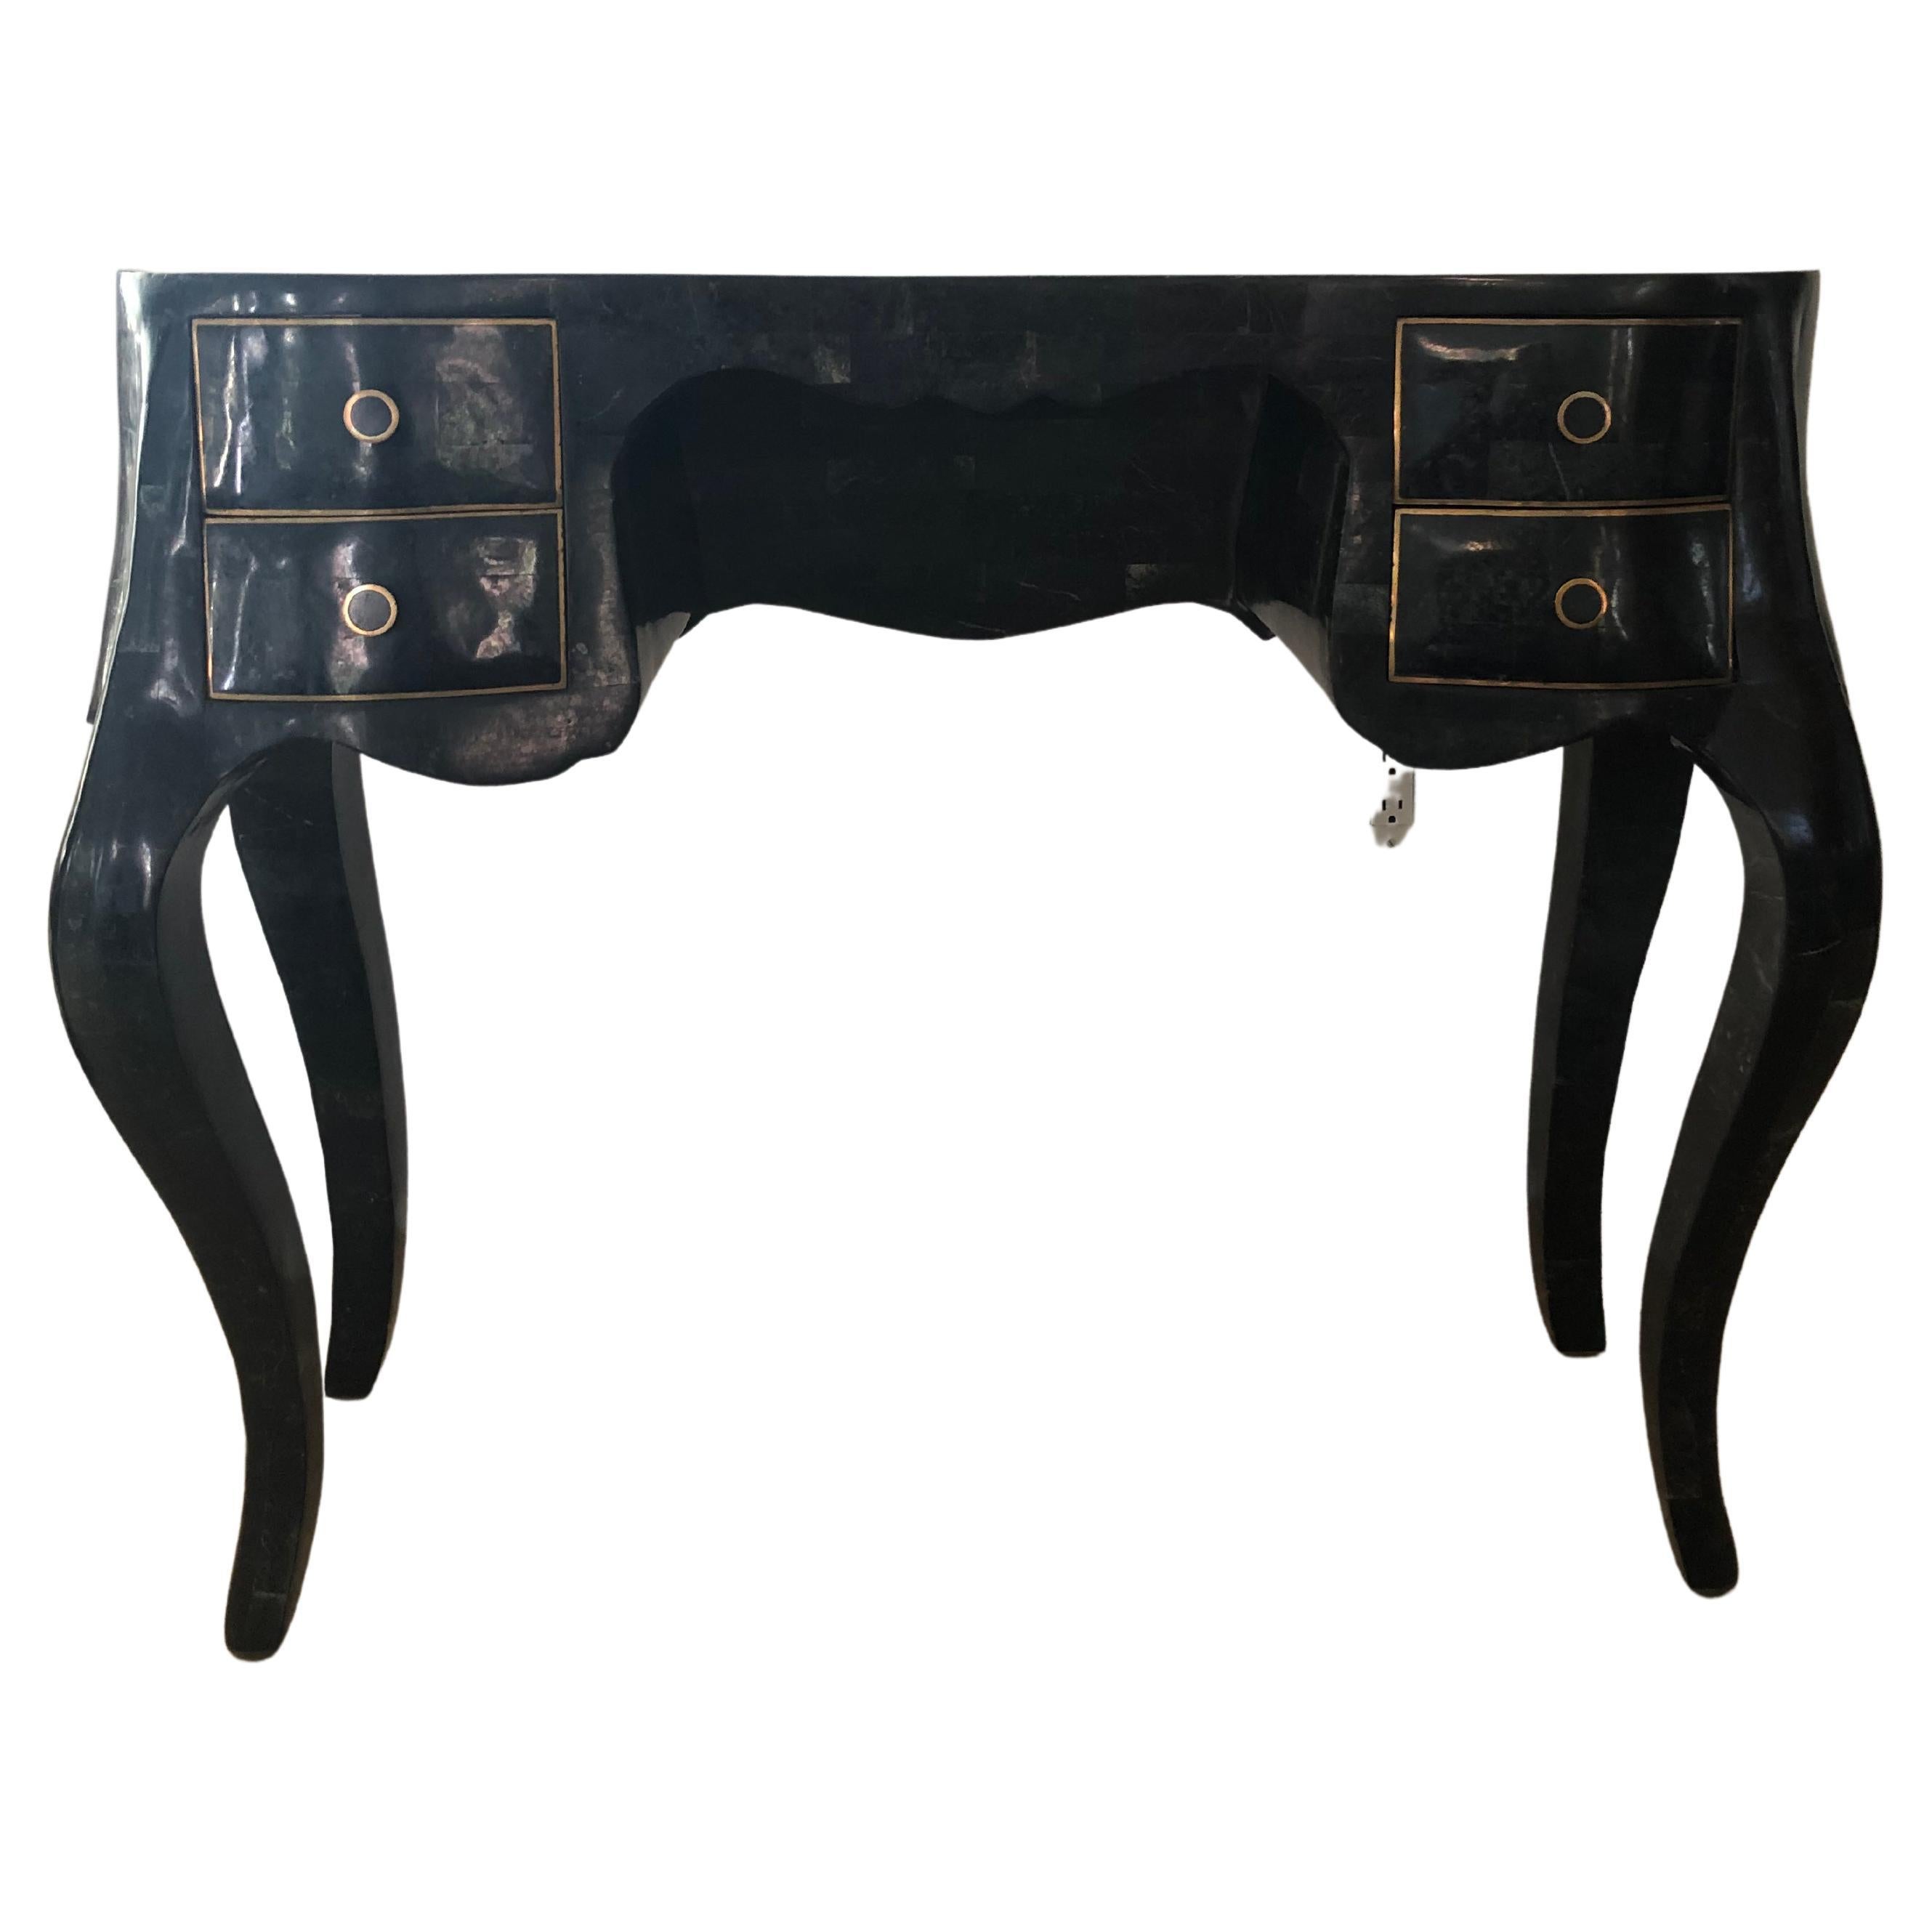 Maitland smith Fossil stone inlaid, bronze mount and curved design vanity table/ladies desk, elegant flair design curved legs and 4 felt lined draws.